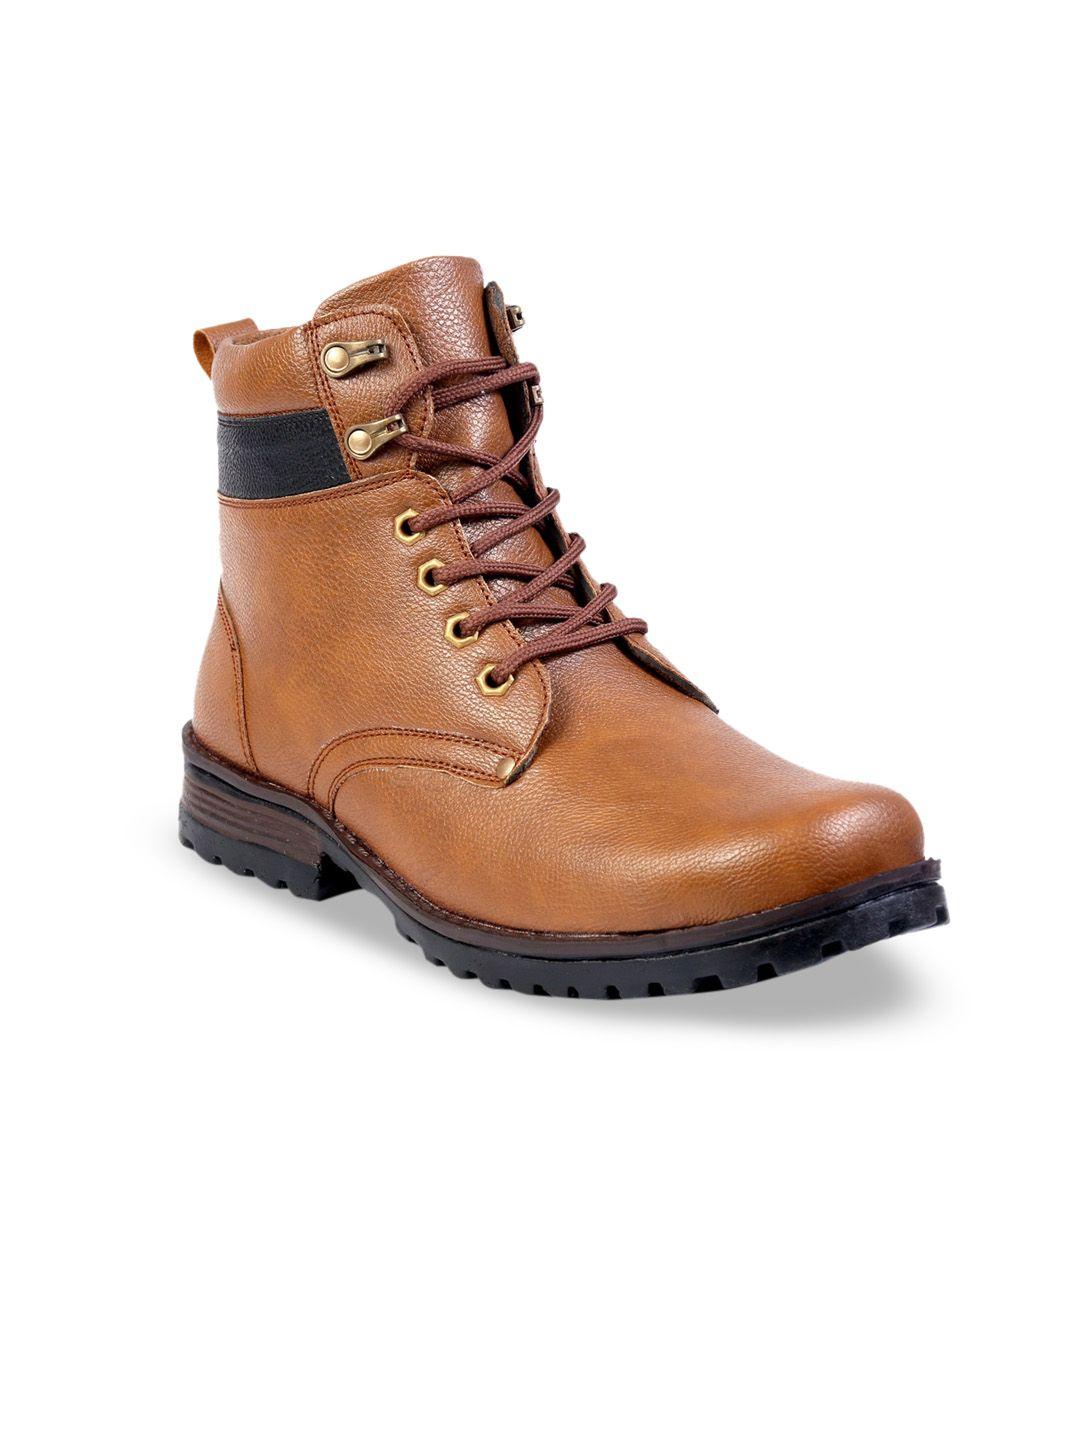 woakers men tan brown solid synthetic high-top flat boots